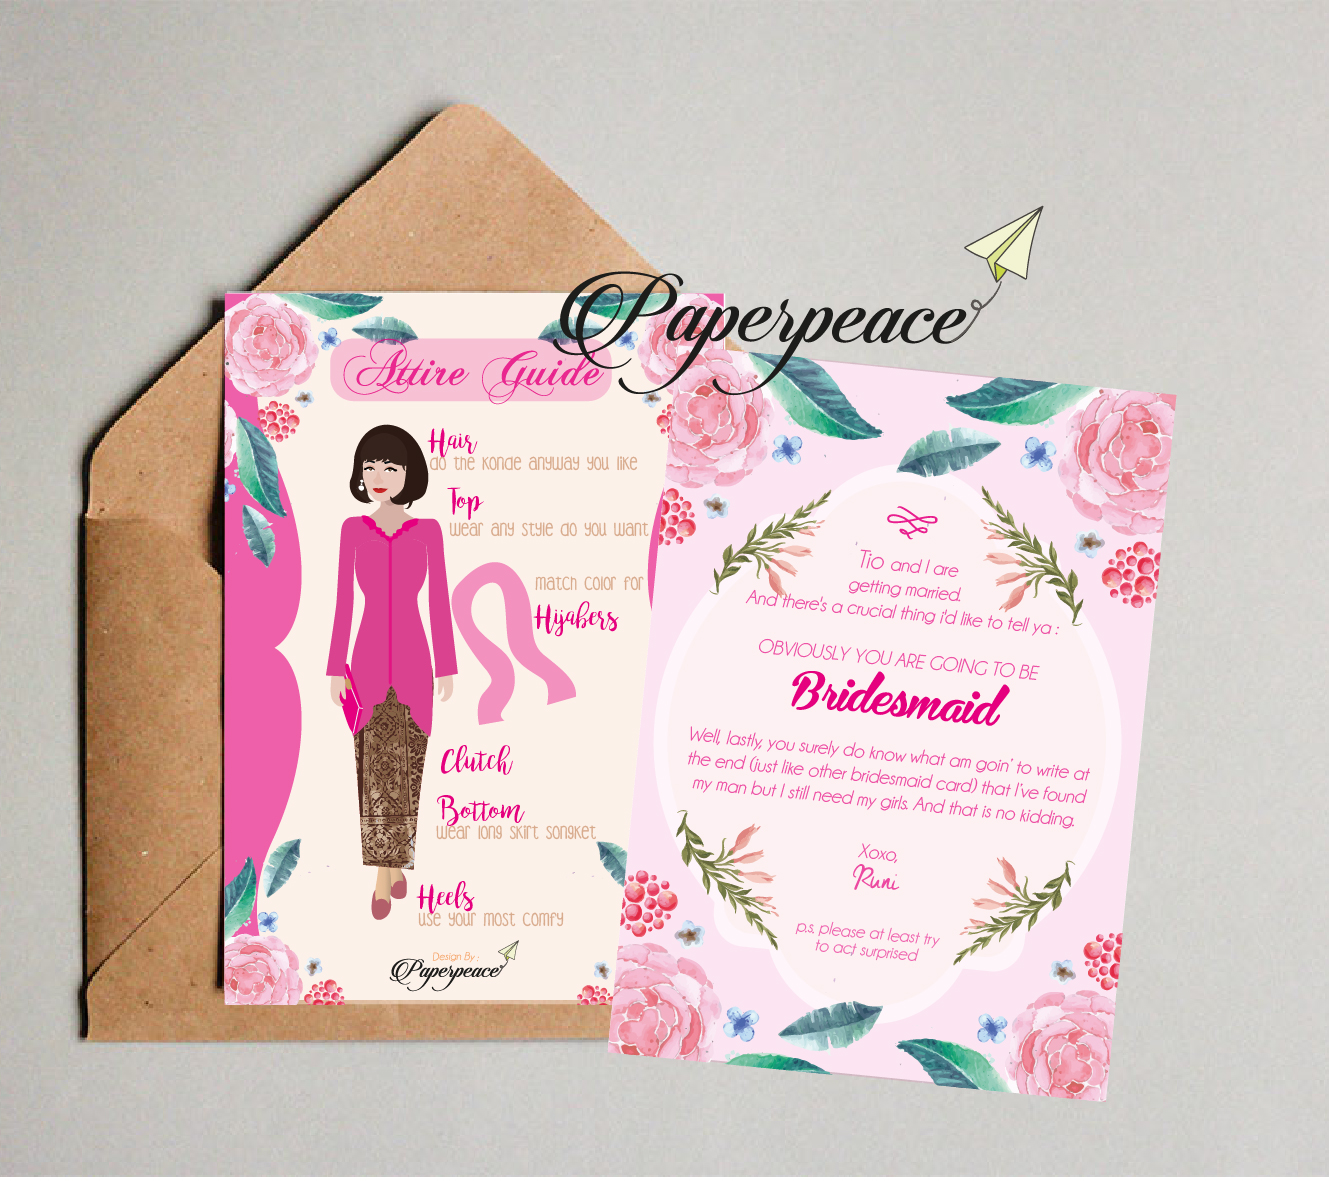 paperpeace-ms-runi-s-bridesmaid-card